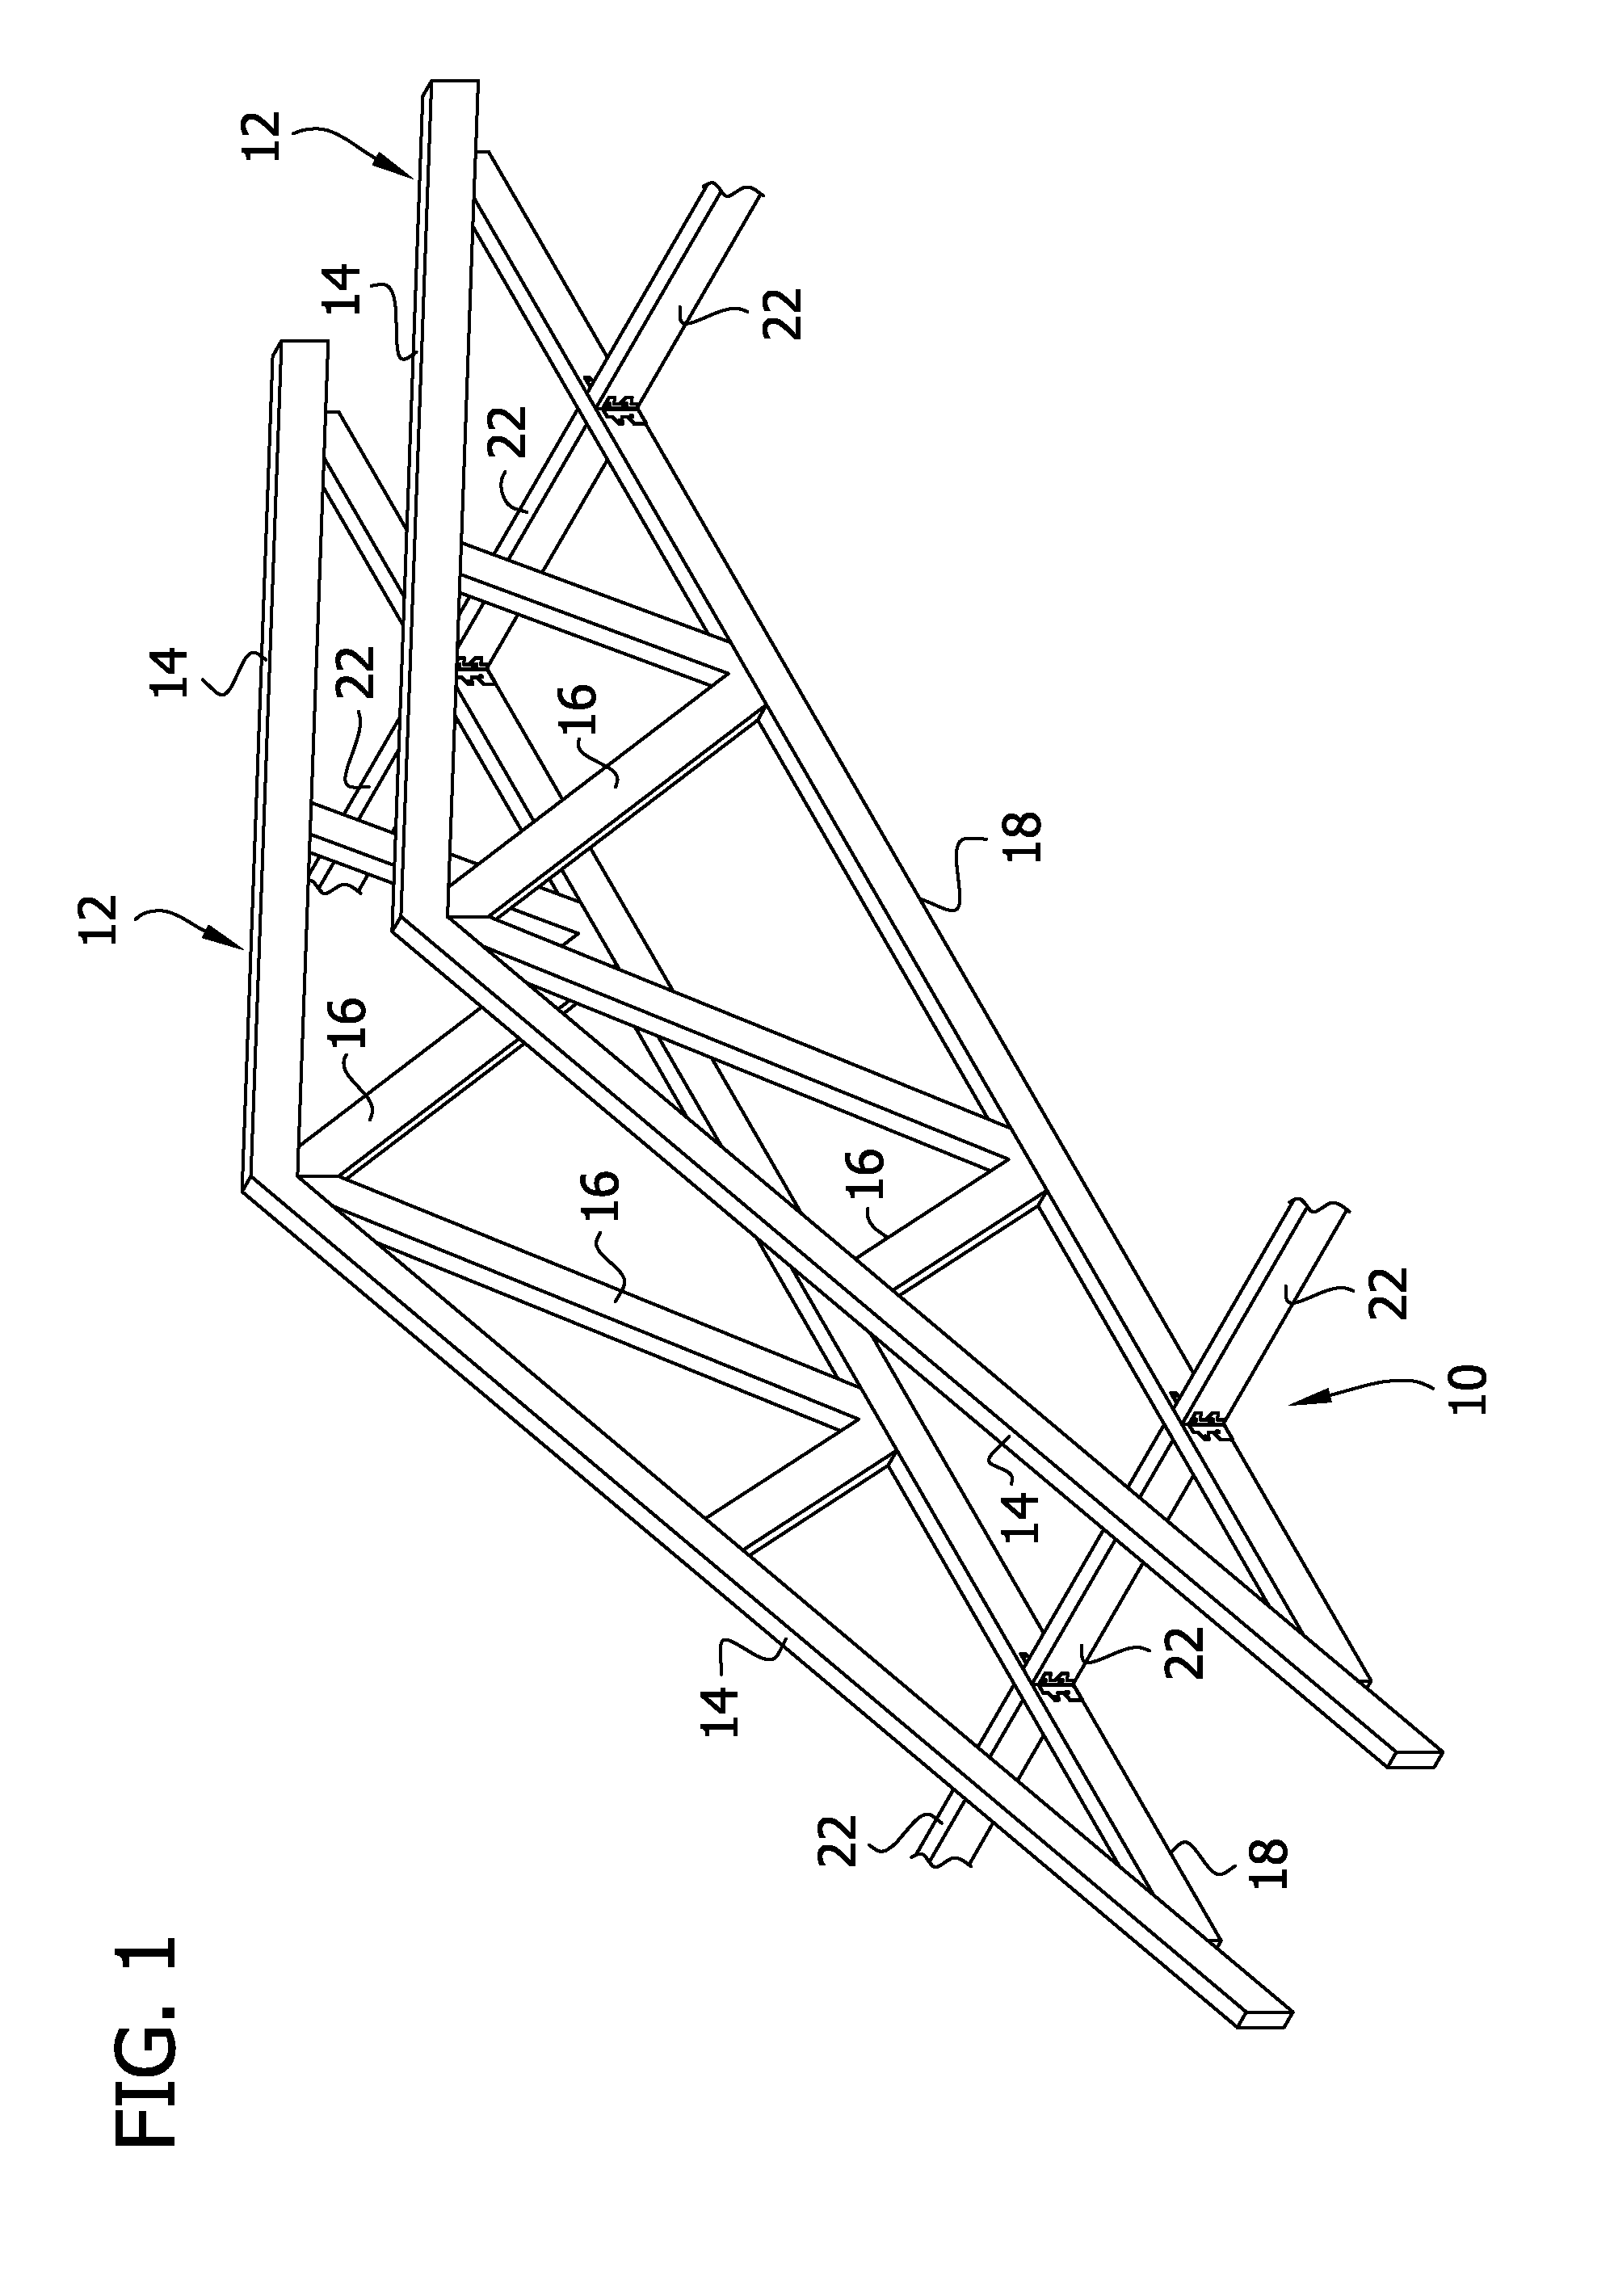 Saddle hanger for a structure